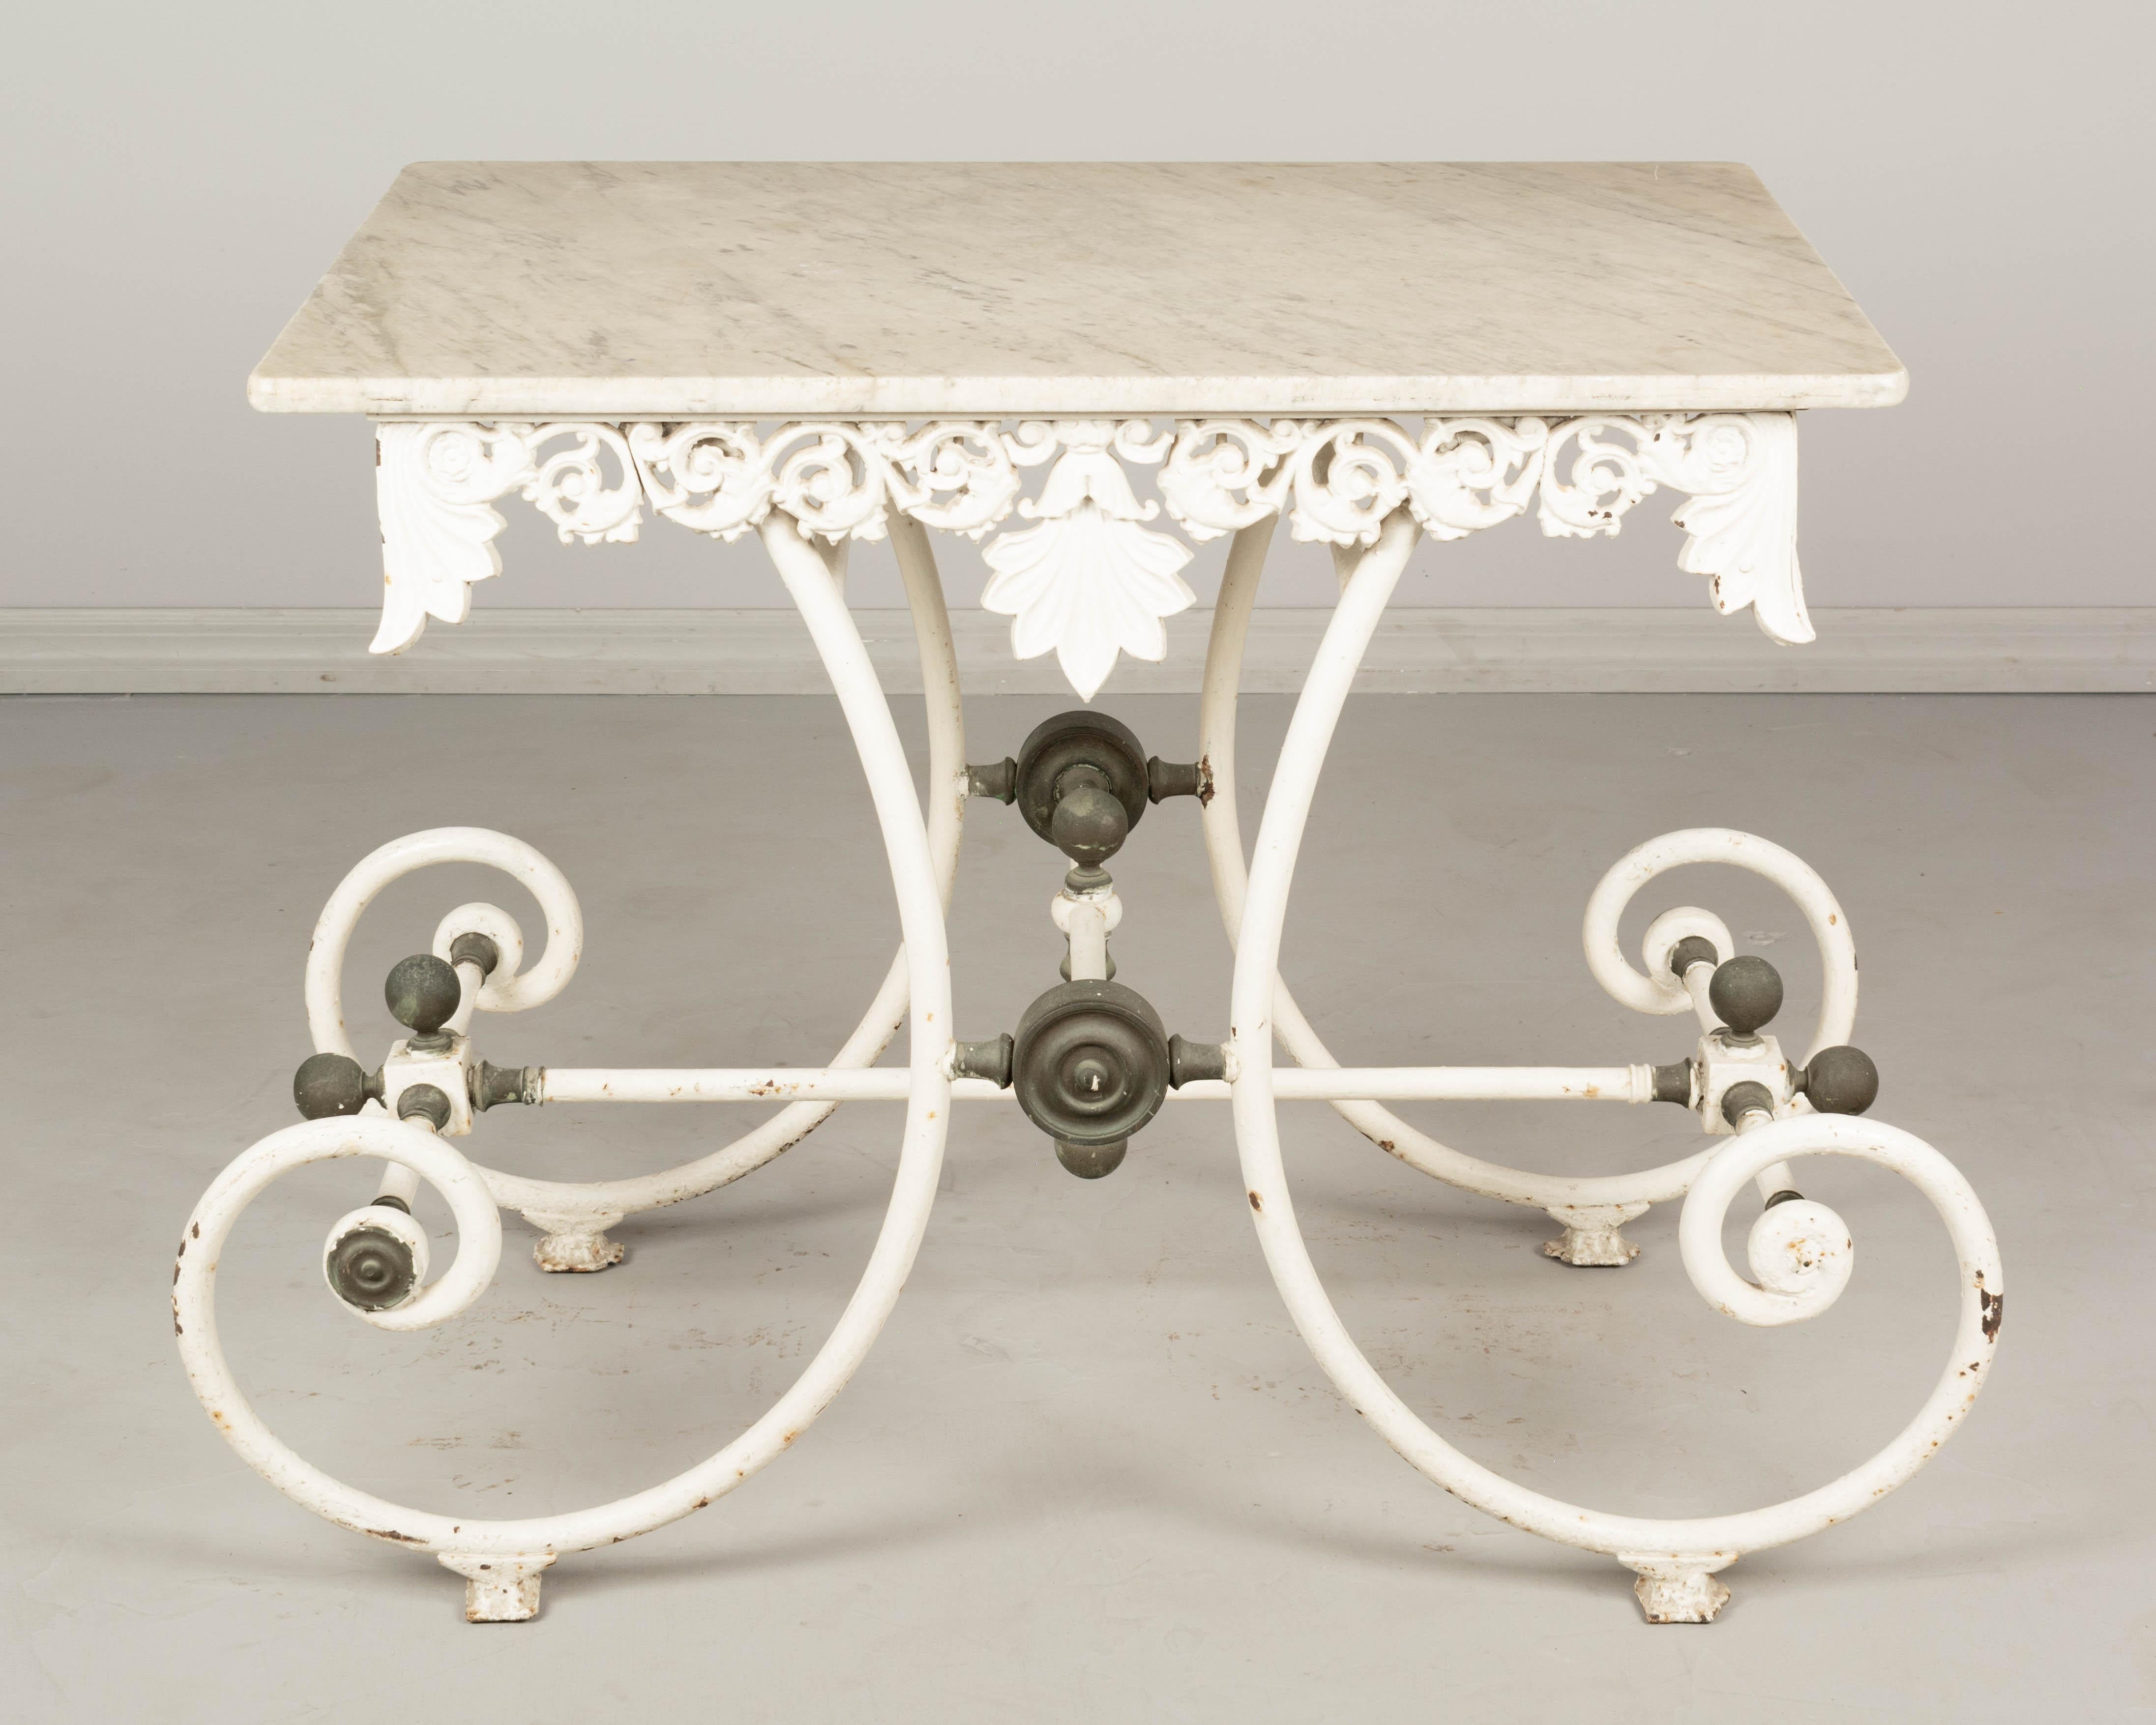 Beaux Arts 19th Century French Iron Marble Top Pastry Table